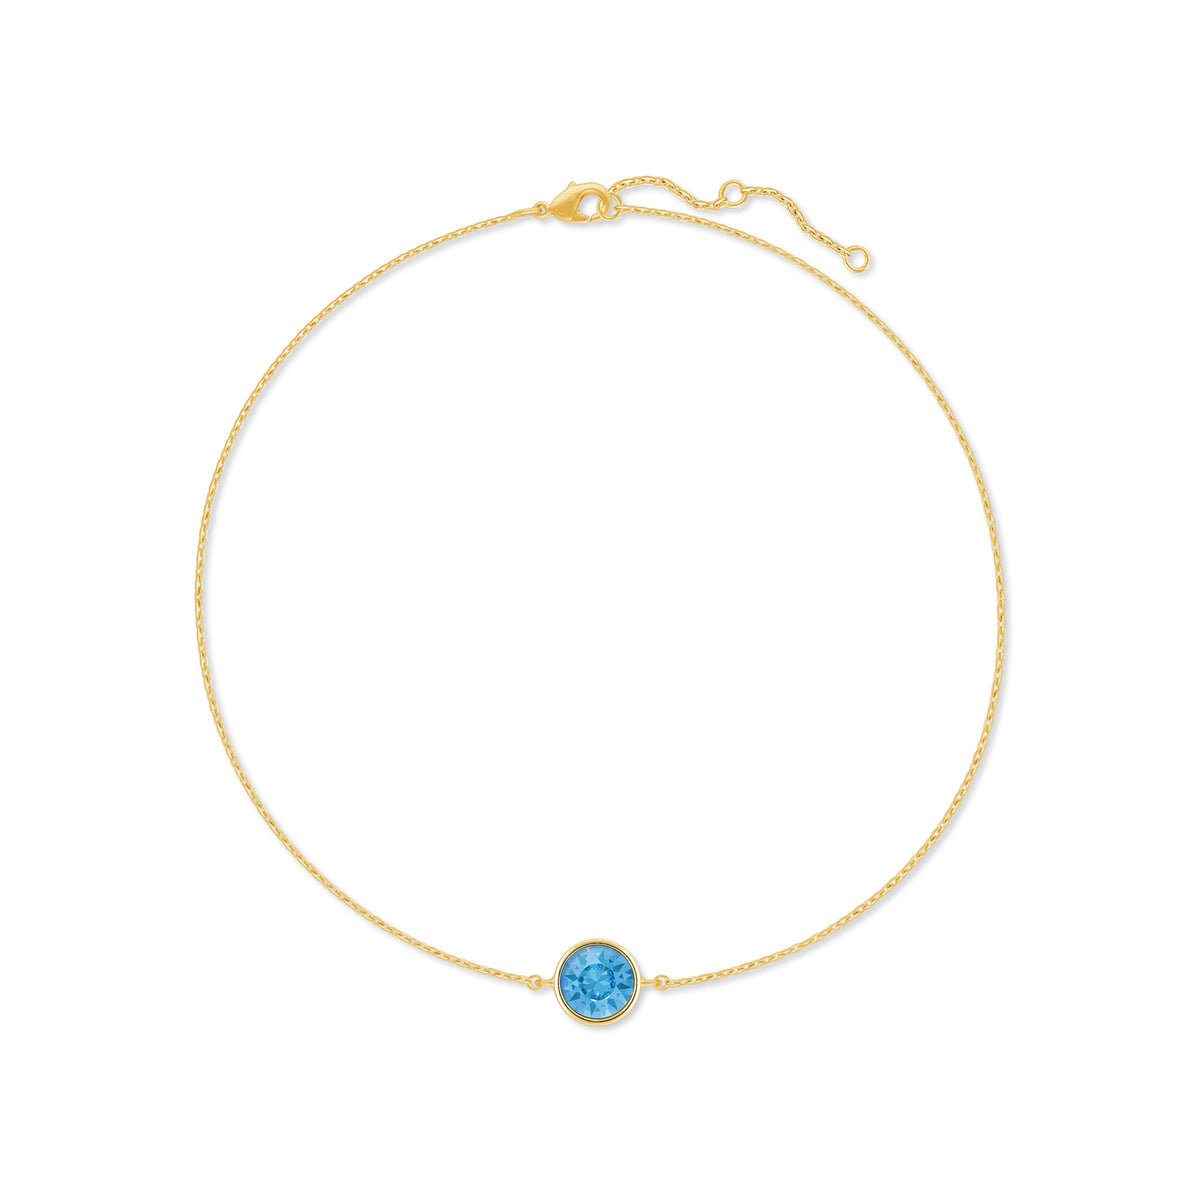 Harley Chain Bracelet with Blue Aquamarine Round Crystals from Swarovski Gold Plated - Ed Heart